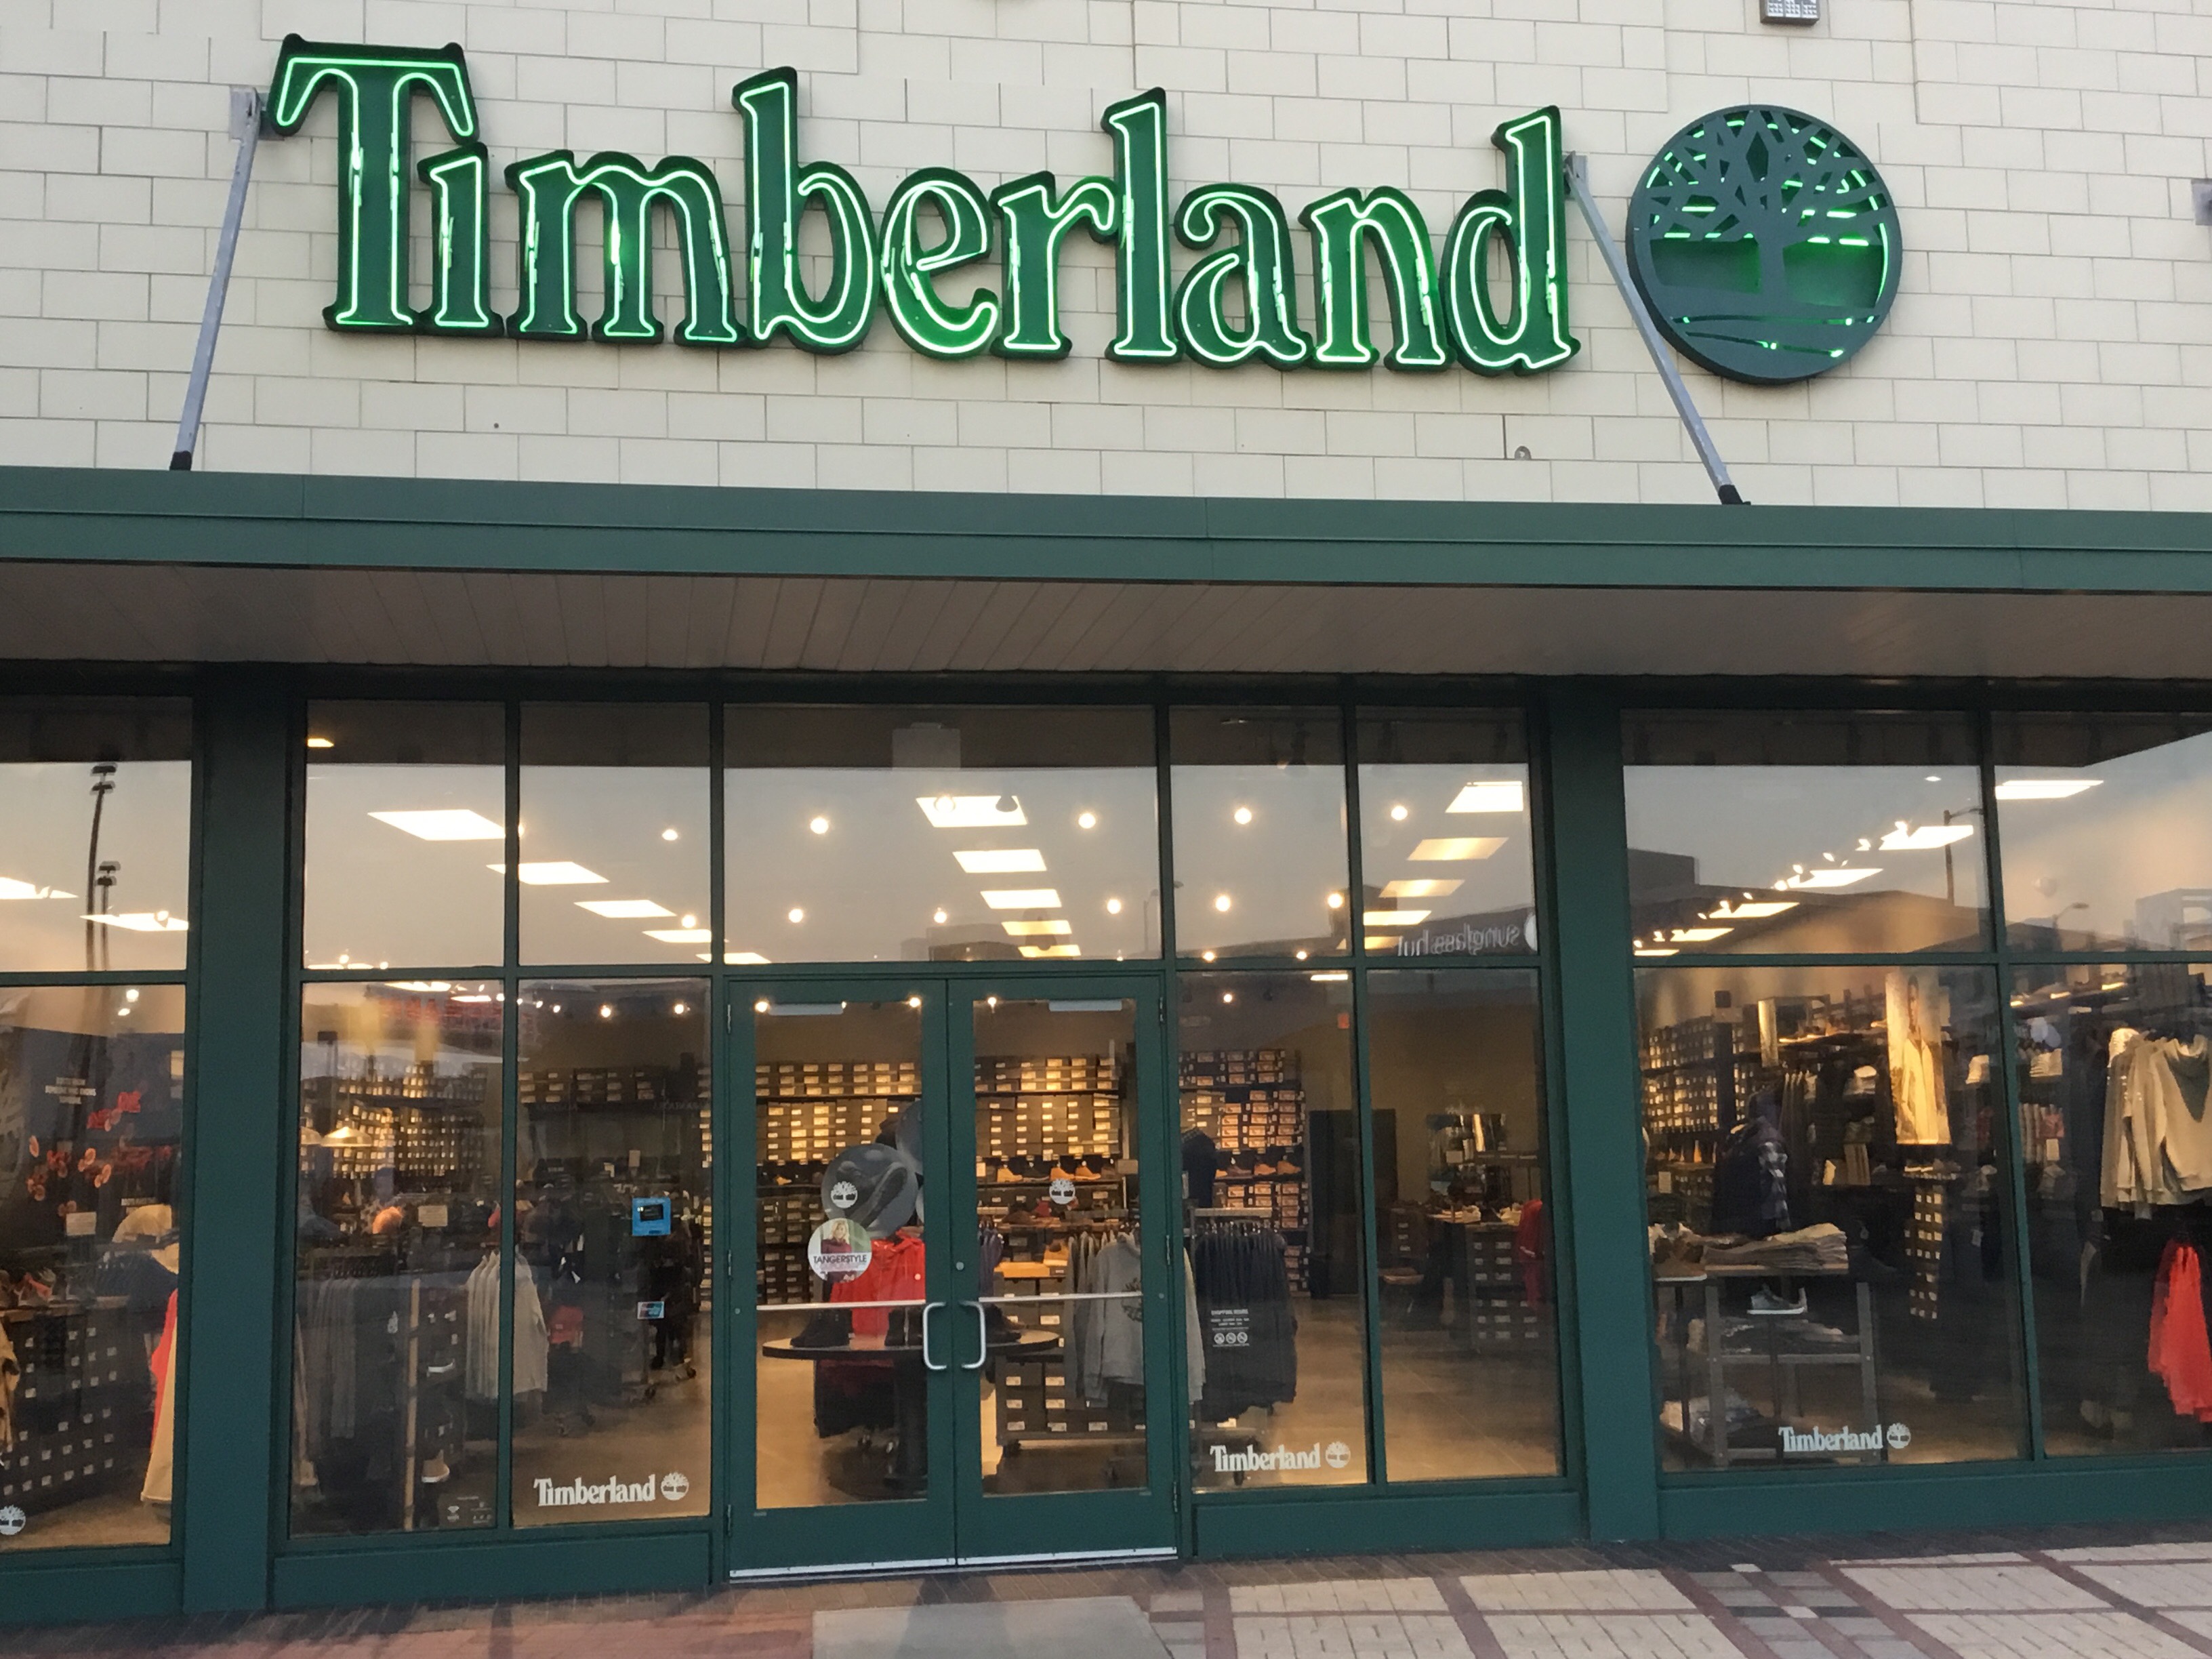 outlet timberland online